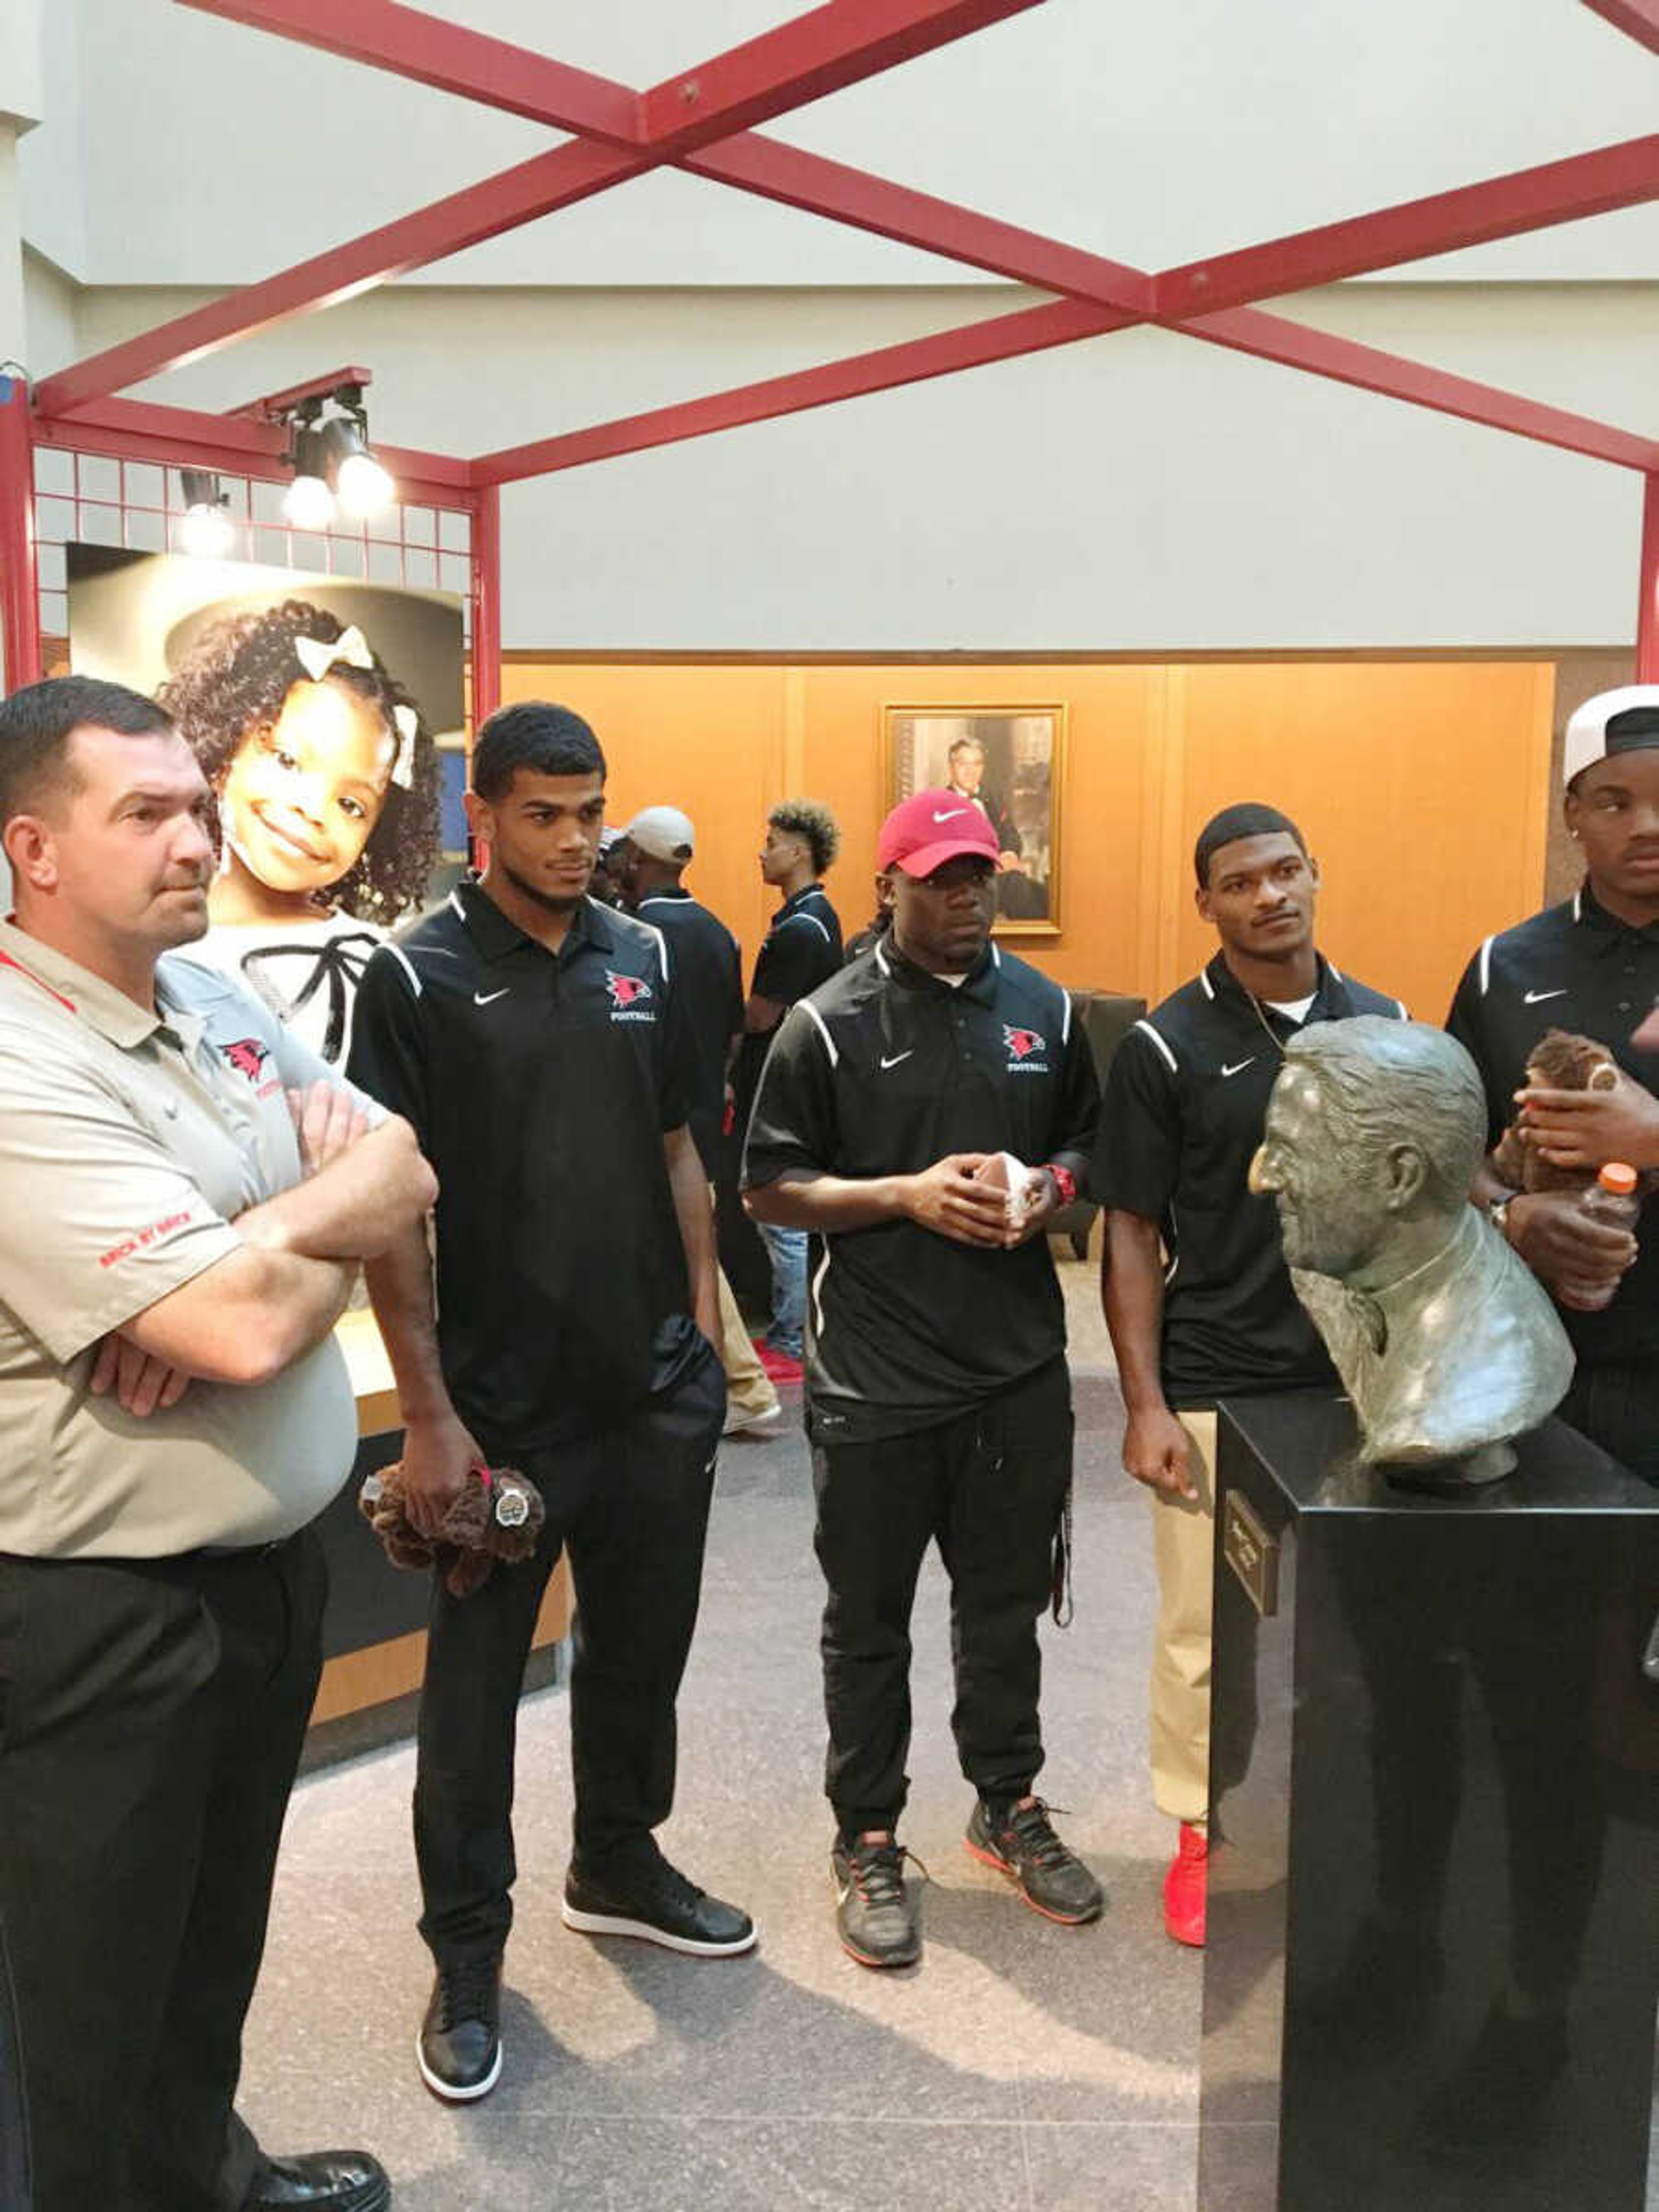 From left to right, coach Tom Matukewicz, junior running back Chase Abbington, sophomore running back Eddie Morris and junior running back Will Young listen to directions while visiting St. Jude children's hospital on Sept. 3. Submitted photo